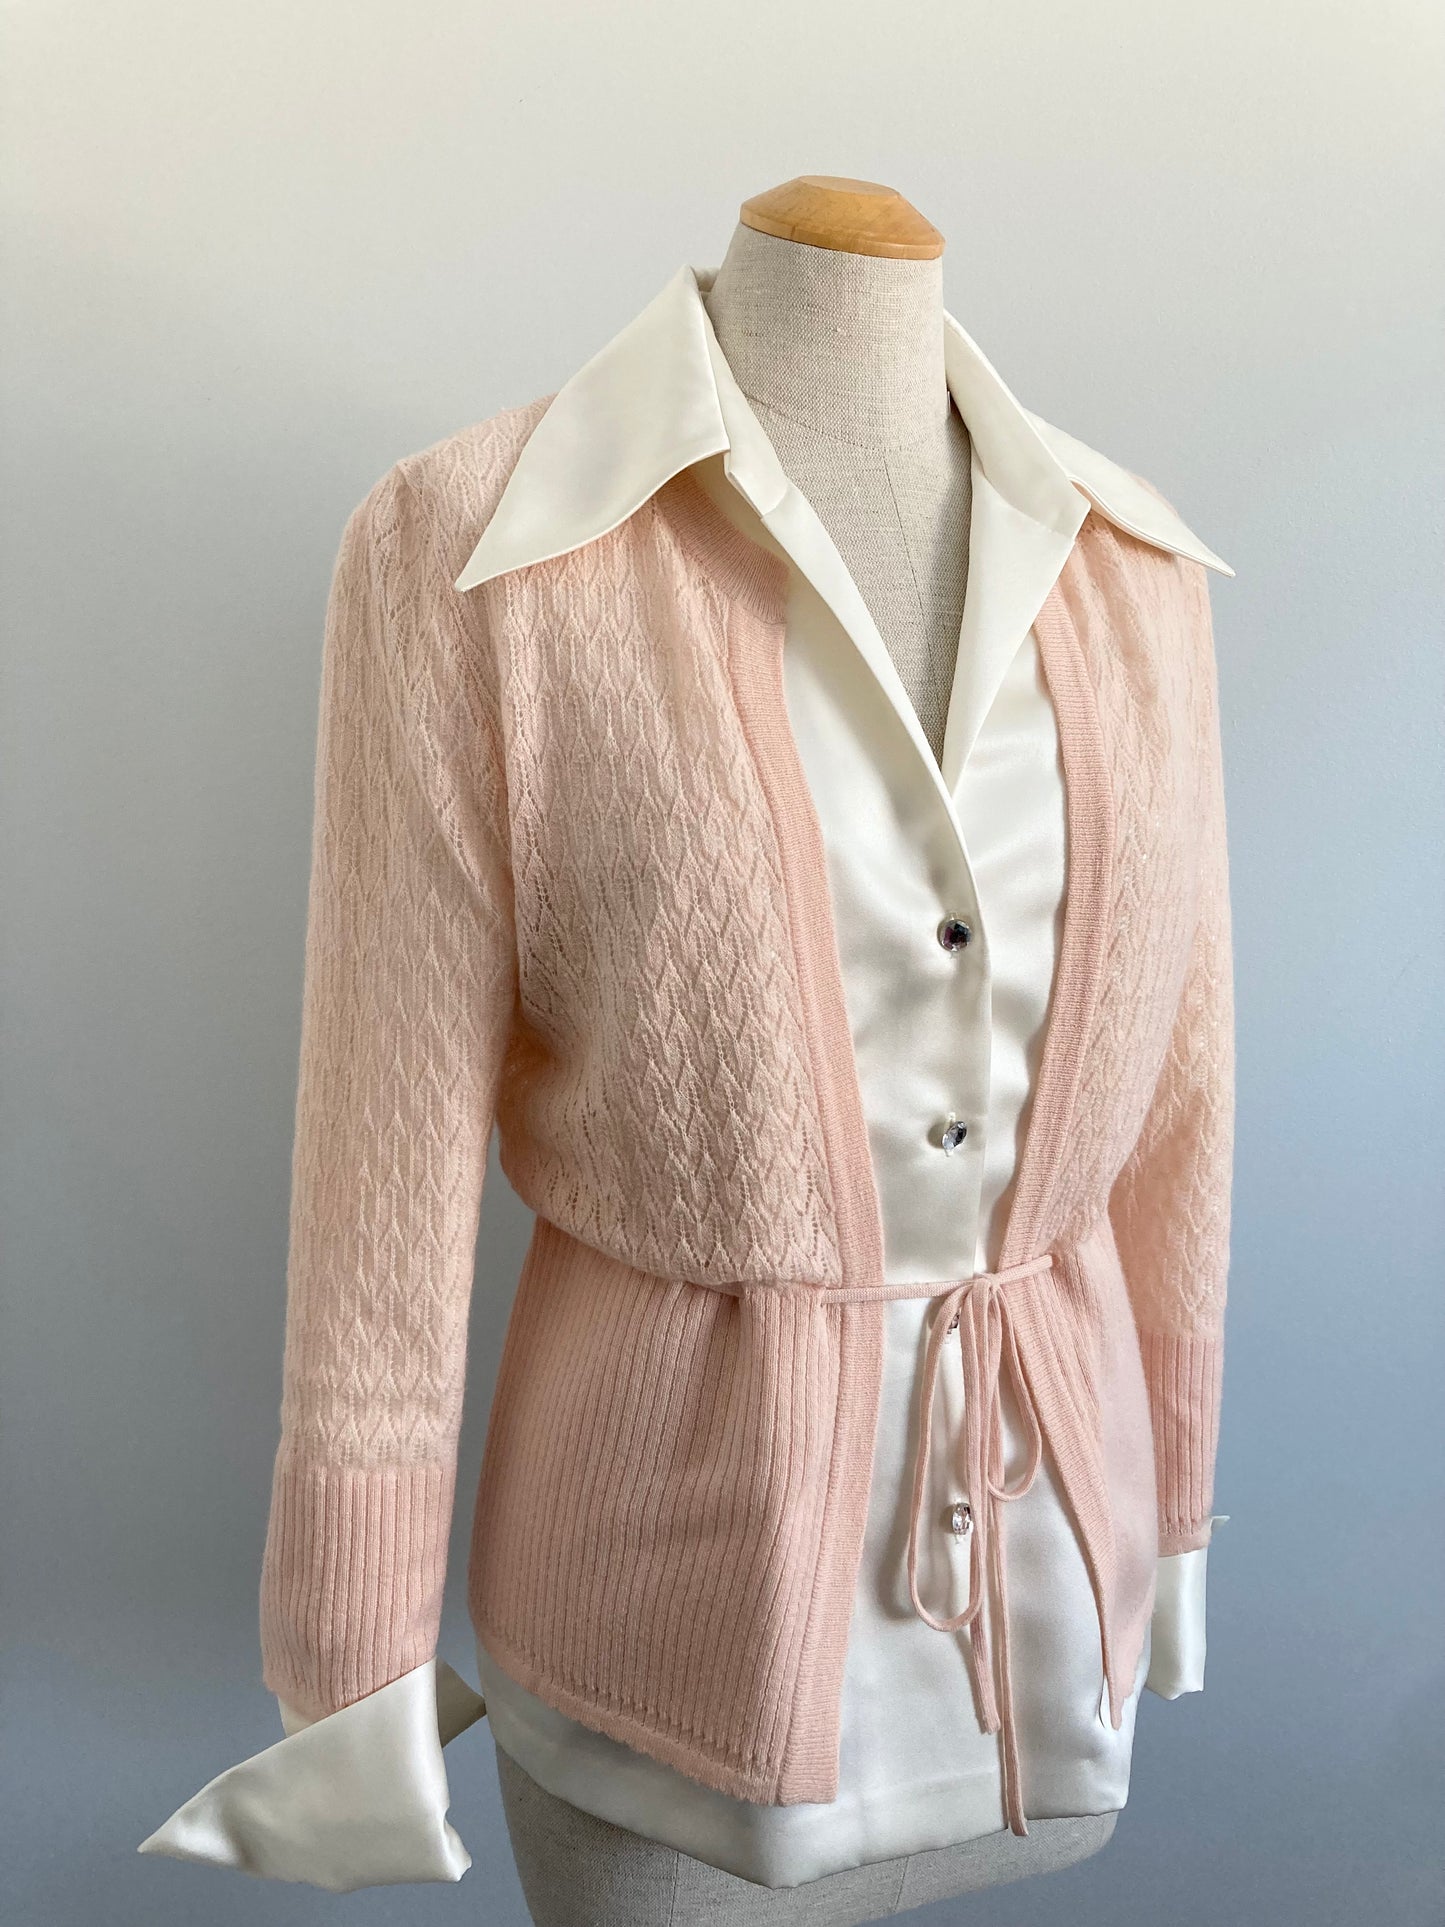 100% Cashmere Lace Sweater, Holt Renfrew Fine Lace Cardigan, Cashmere Spring Sweater, Peachy Pink Cashmere Sweater, Size M